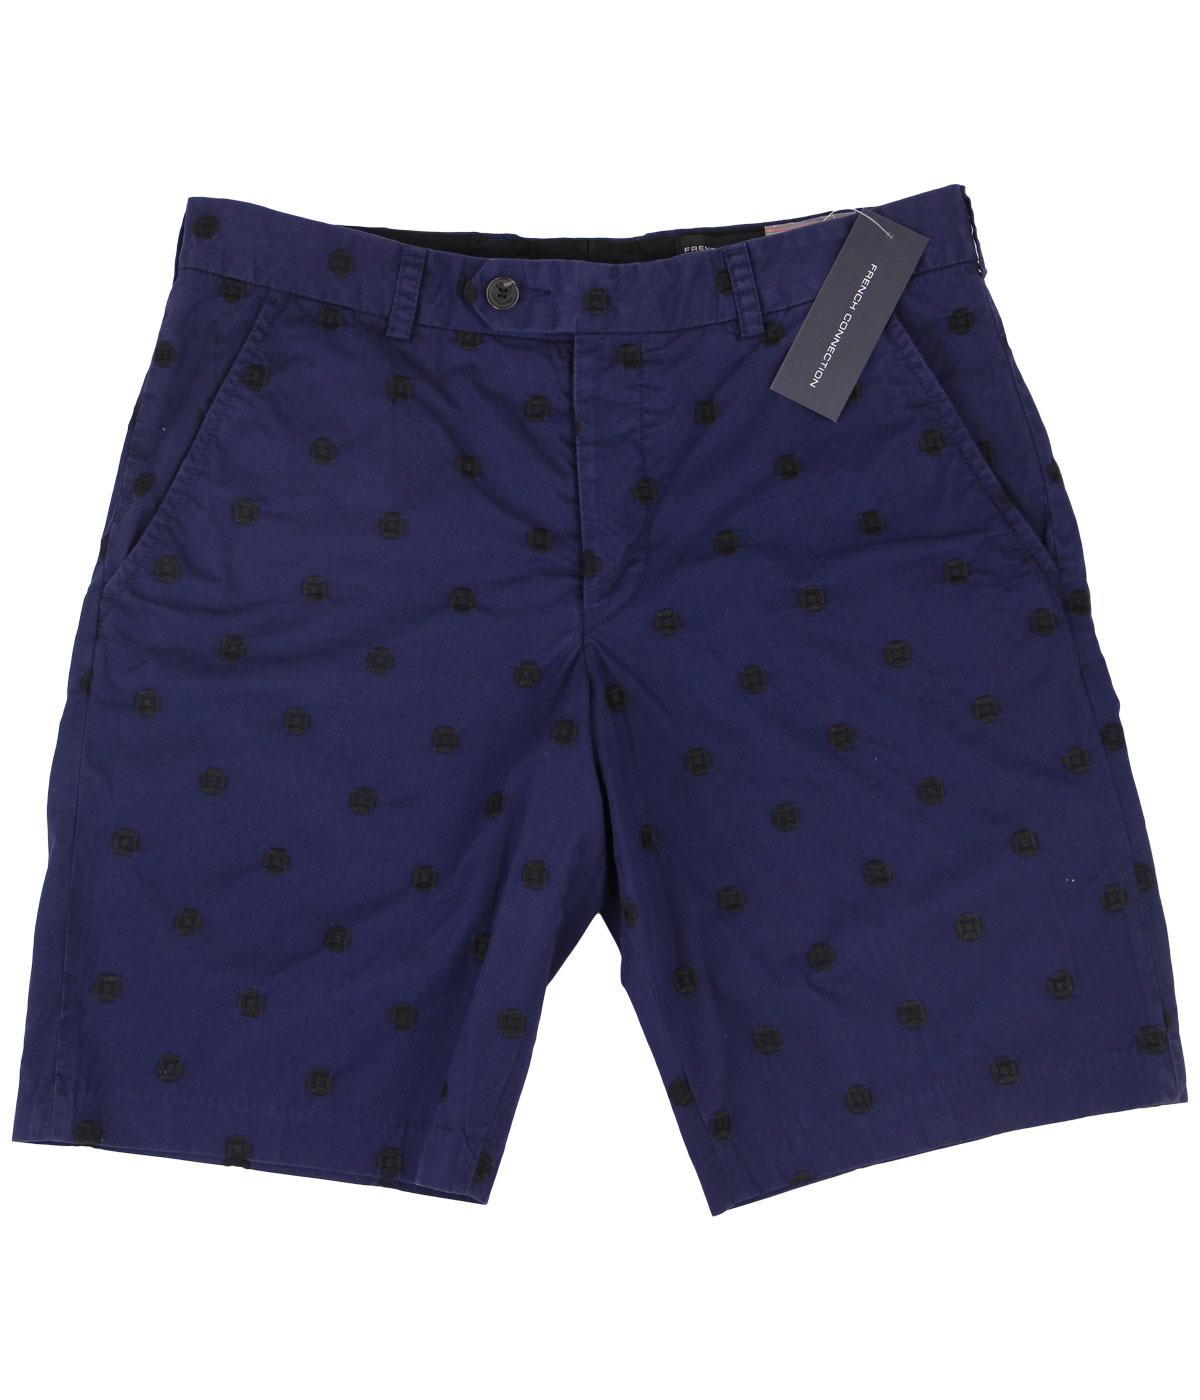 FRENCH CONNECTION Isizwe Retro Embroidered Shorts in Blueblood